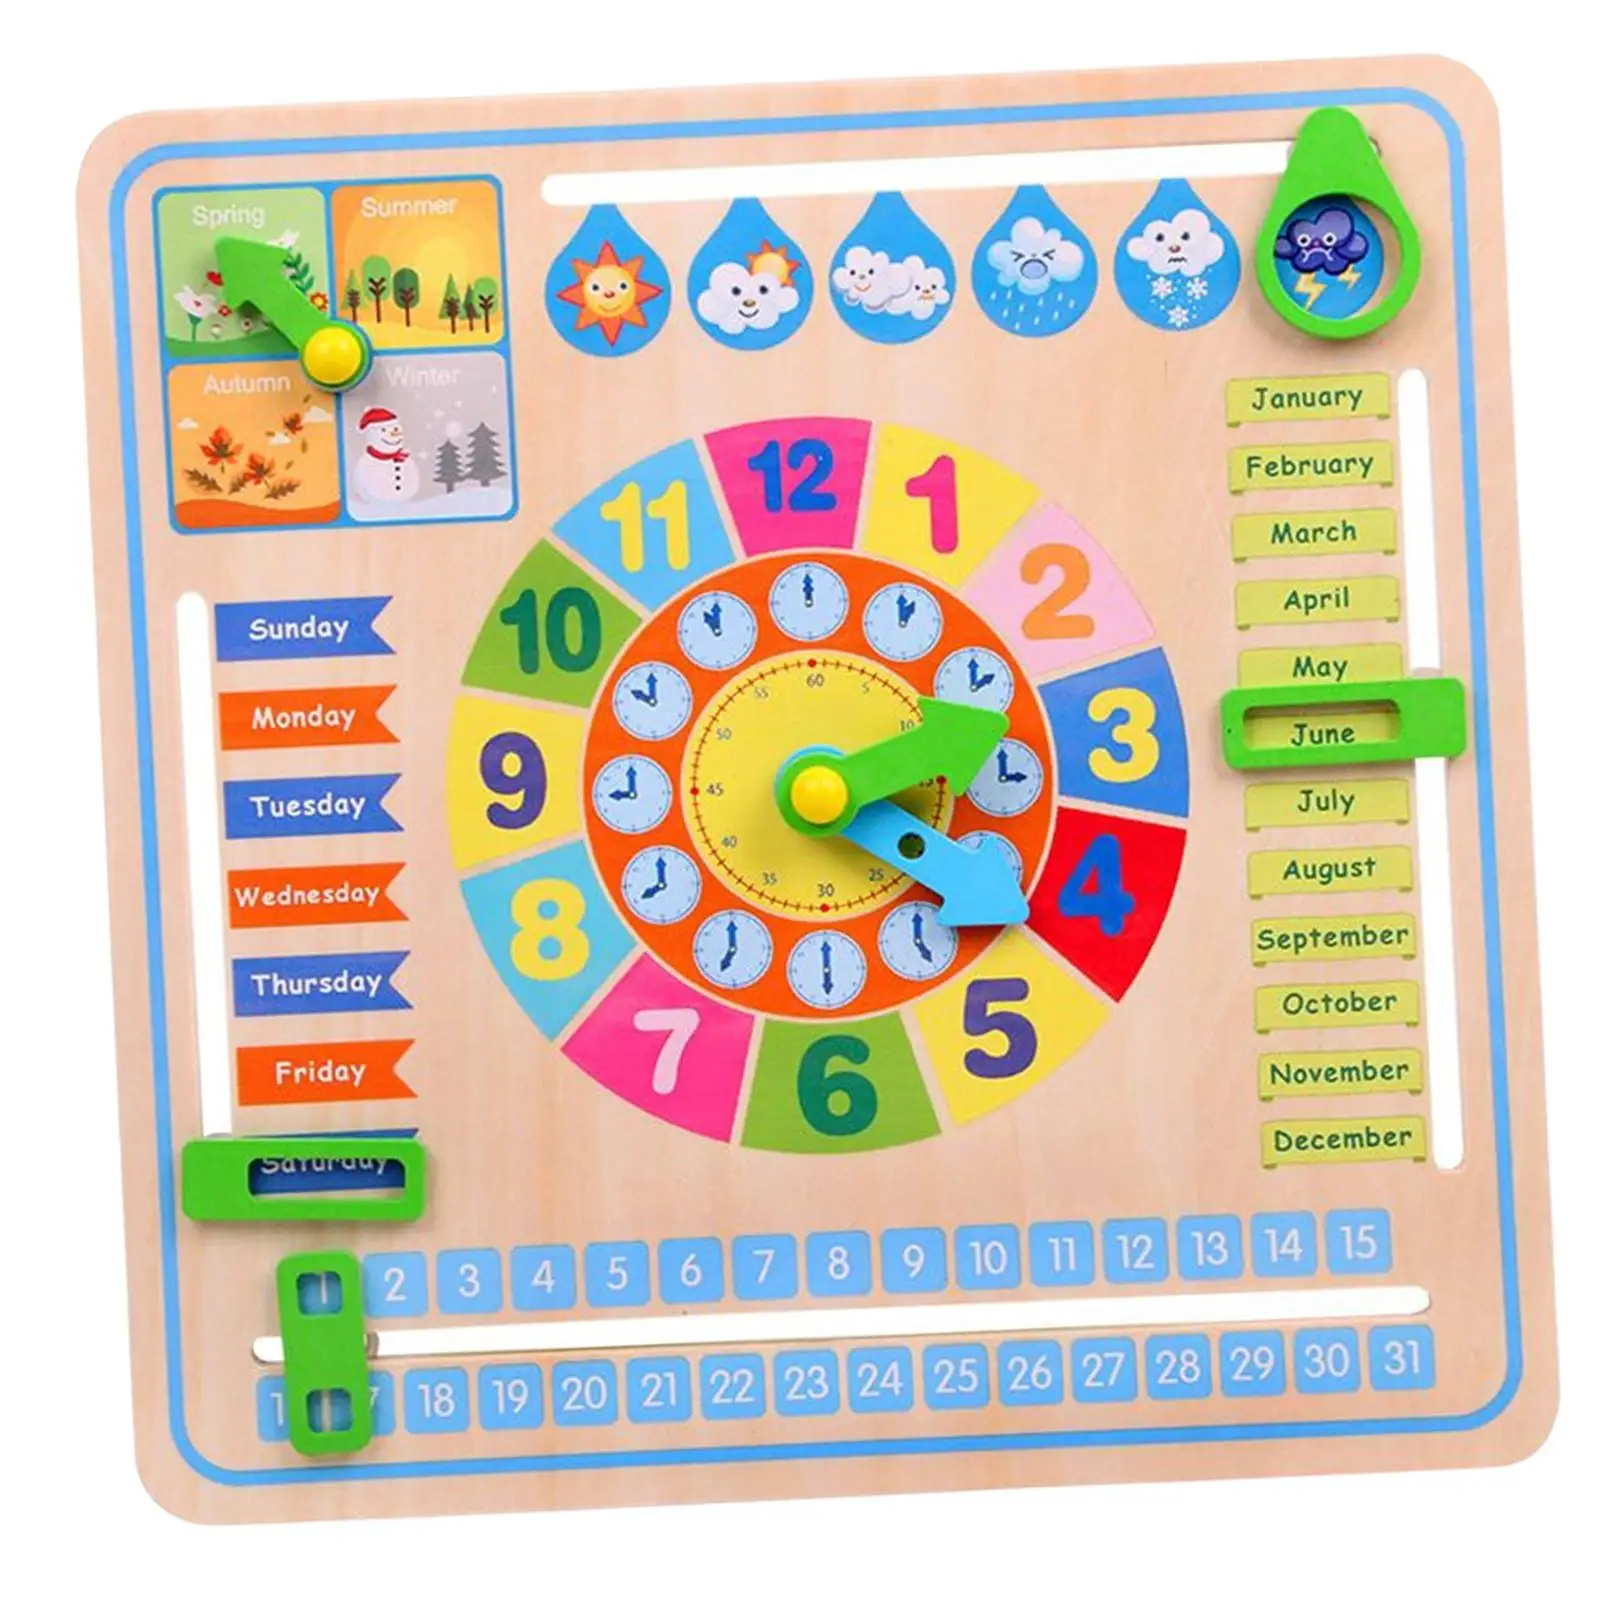 Montessori Toys Seasons Months Days of Week Calendar Learning for Age 3 4